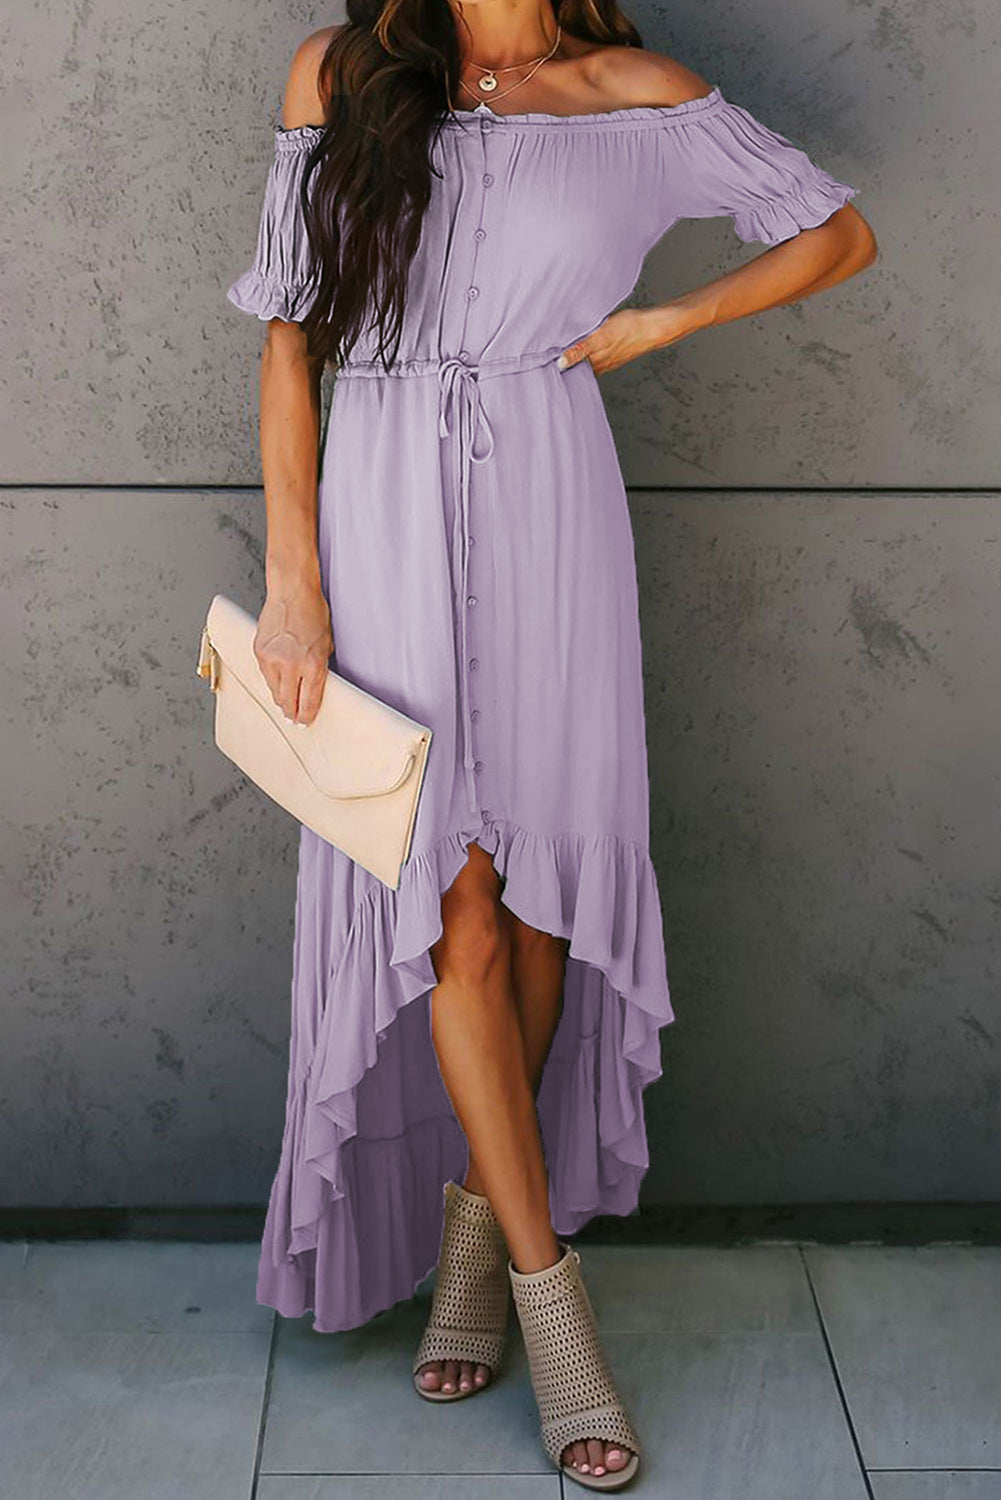 Purple White Off the Shoulder Dress High Low Maxi Dress  LC611566-8